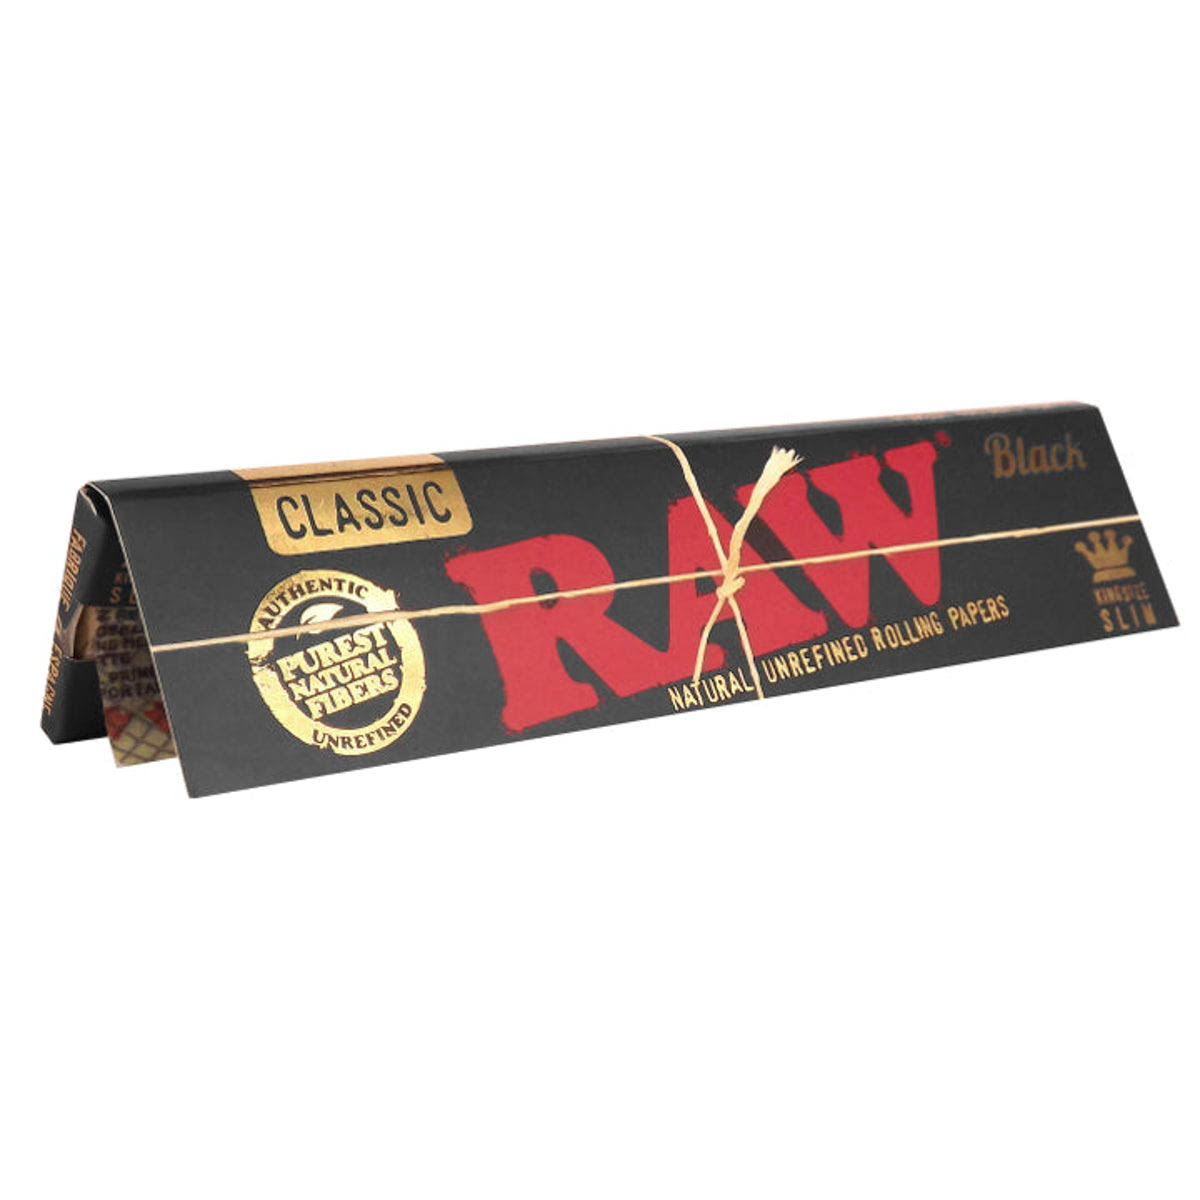 Raw Classic King Size Slim Black, Single Booklet (32 Papers)